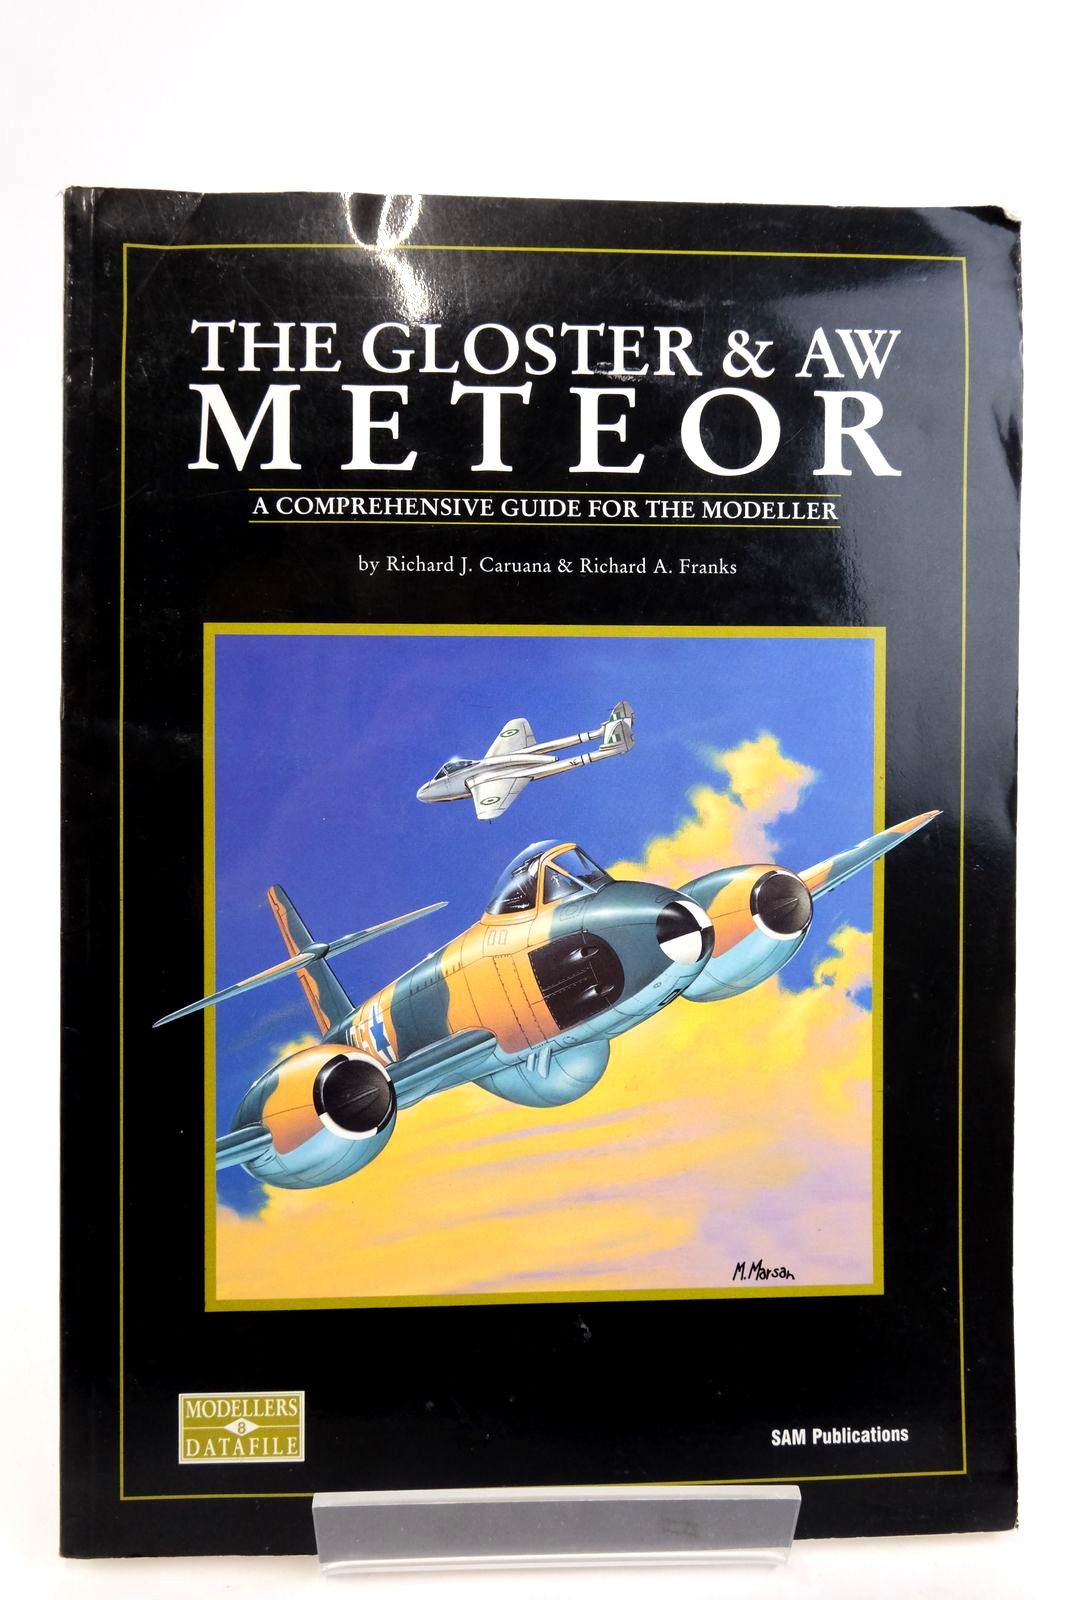 Photo of THE GLOSTER & AW METEOR: A COMPREHENSIVE GUIDE FOR THE MODELLER written by Caruana, Richard J.
Franks, Richard A. published by Sam Publications (STOCK CODE: 2136282)  for sale by Stella & Rose's Books